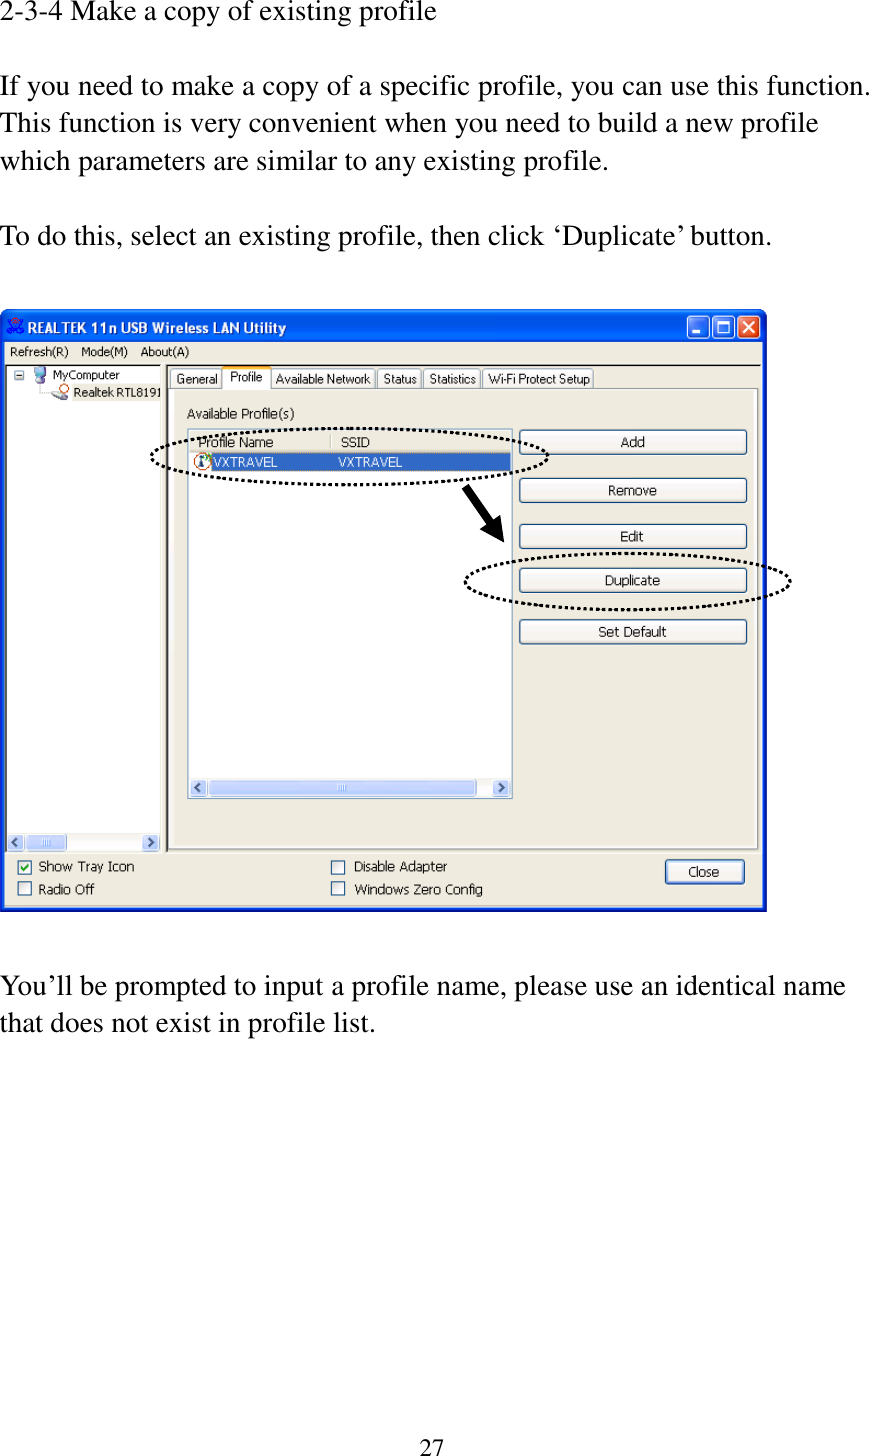 27  2-3-4 Make a copy of existing profile  If you need to make a copy of a specific profile, you can use this function. This function is very convenient when you need to build a new profile which parameters are similar to any existing profile.  To do this, select an existing profile, then click ‘Duplicate’ button.    You’ll be prompted to input a profile name, please use an identical name that does not exist in profile list. 